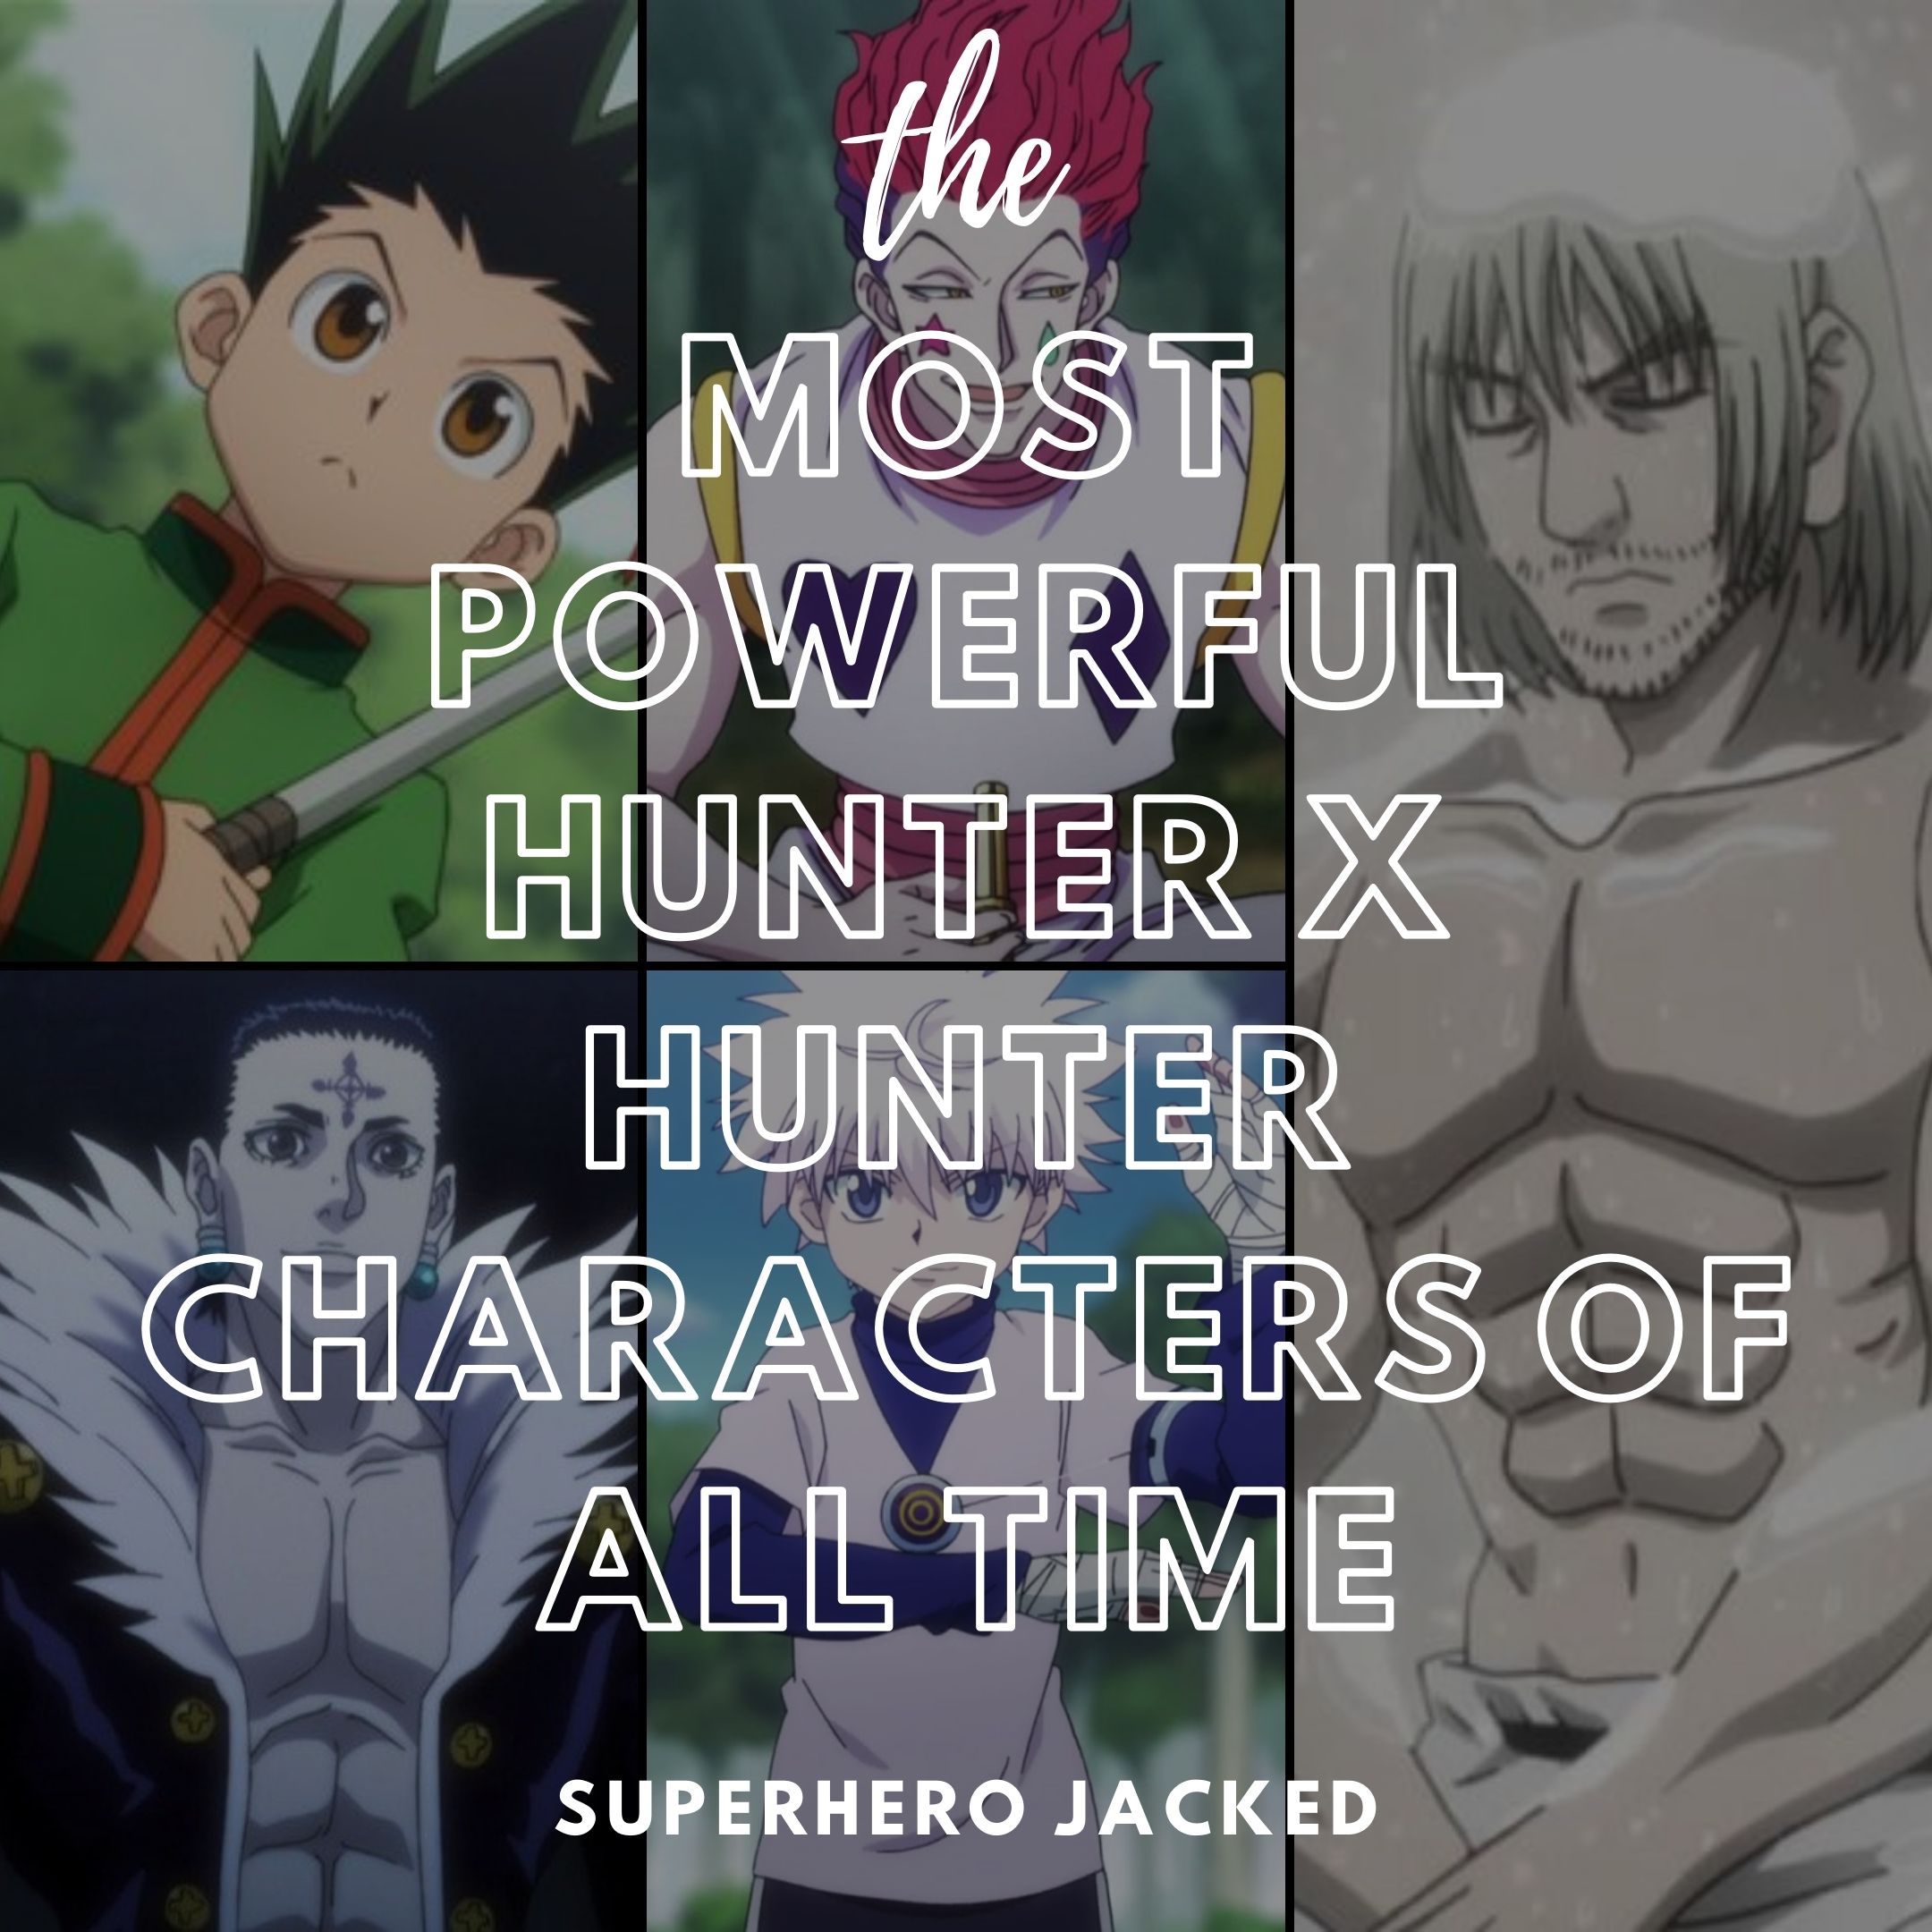 Is HxH (Hunter x Hunter) finished forever? - Quora